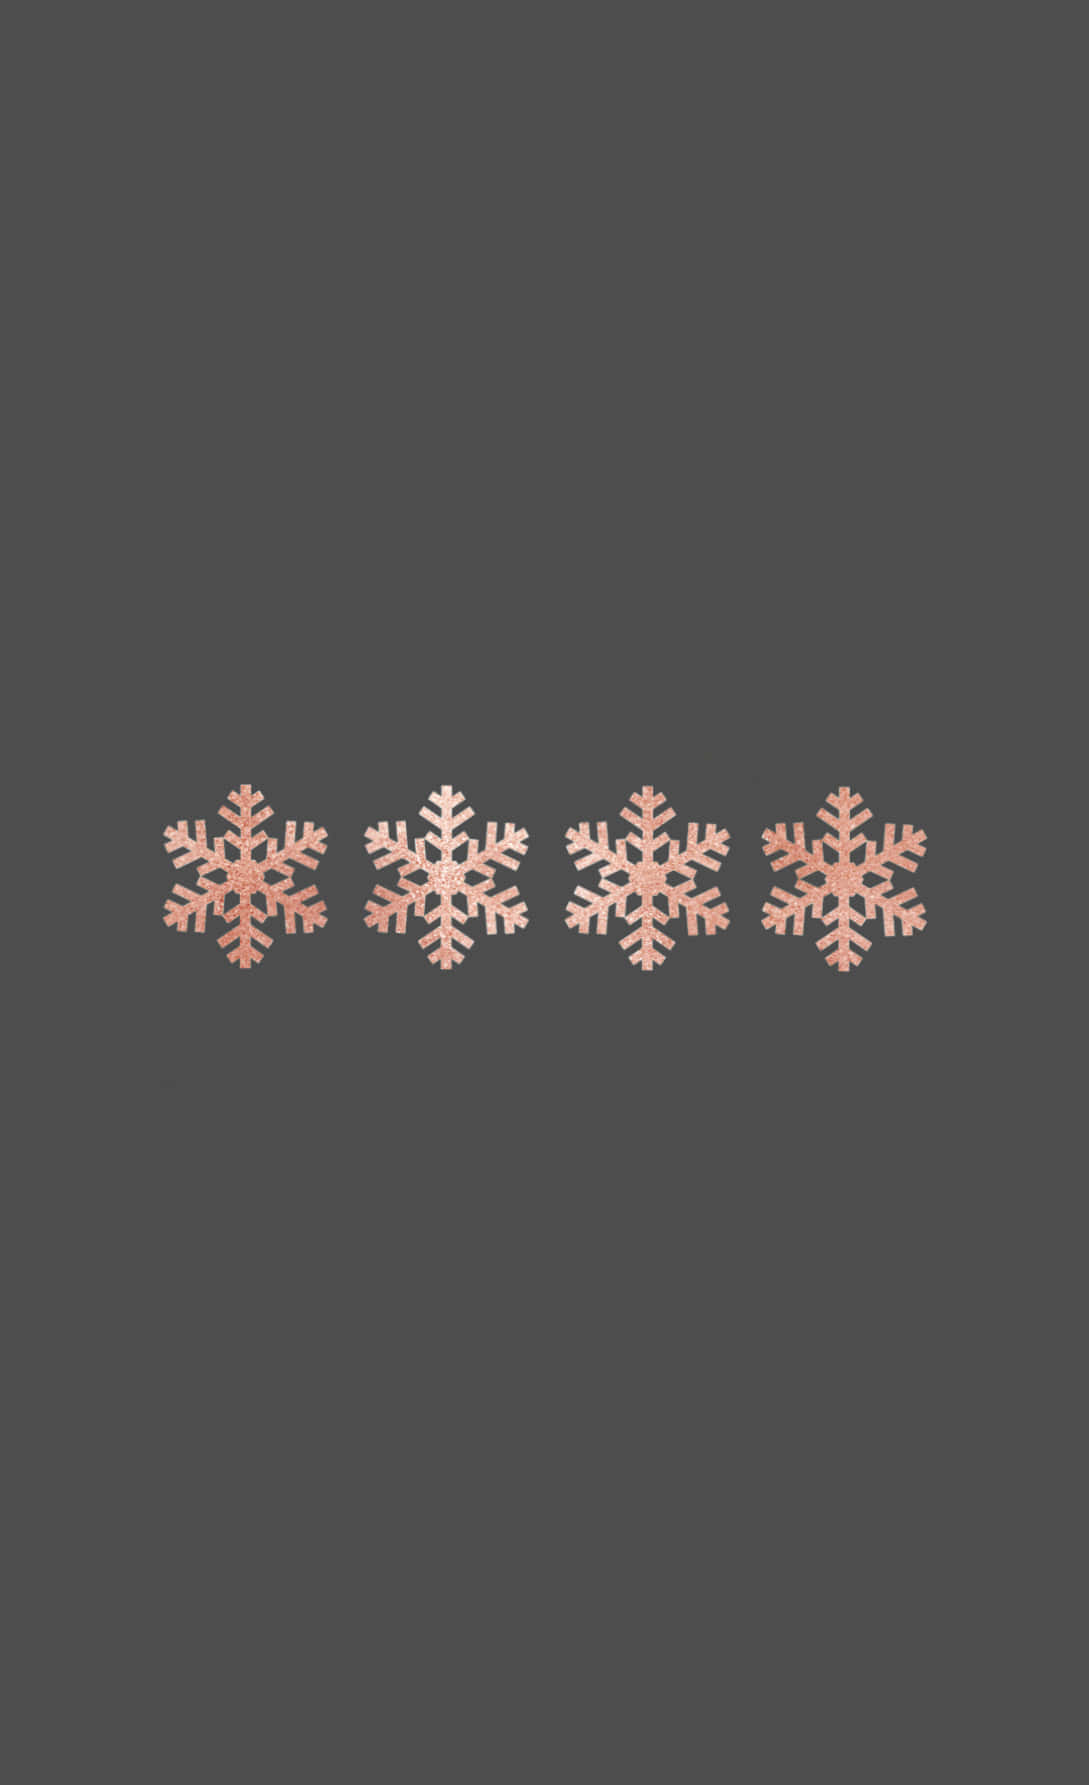 Download A Set Of Snowflakes On A Gray Background Wallpaper ...